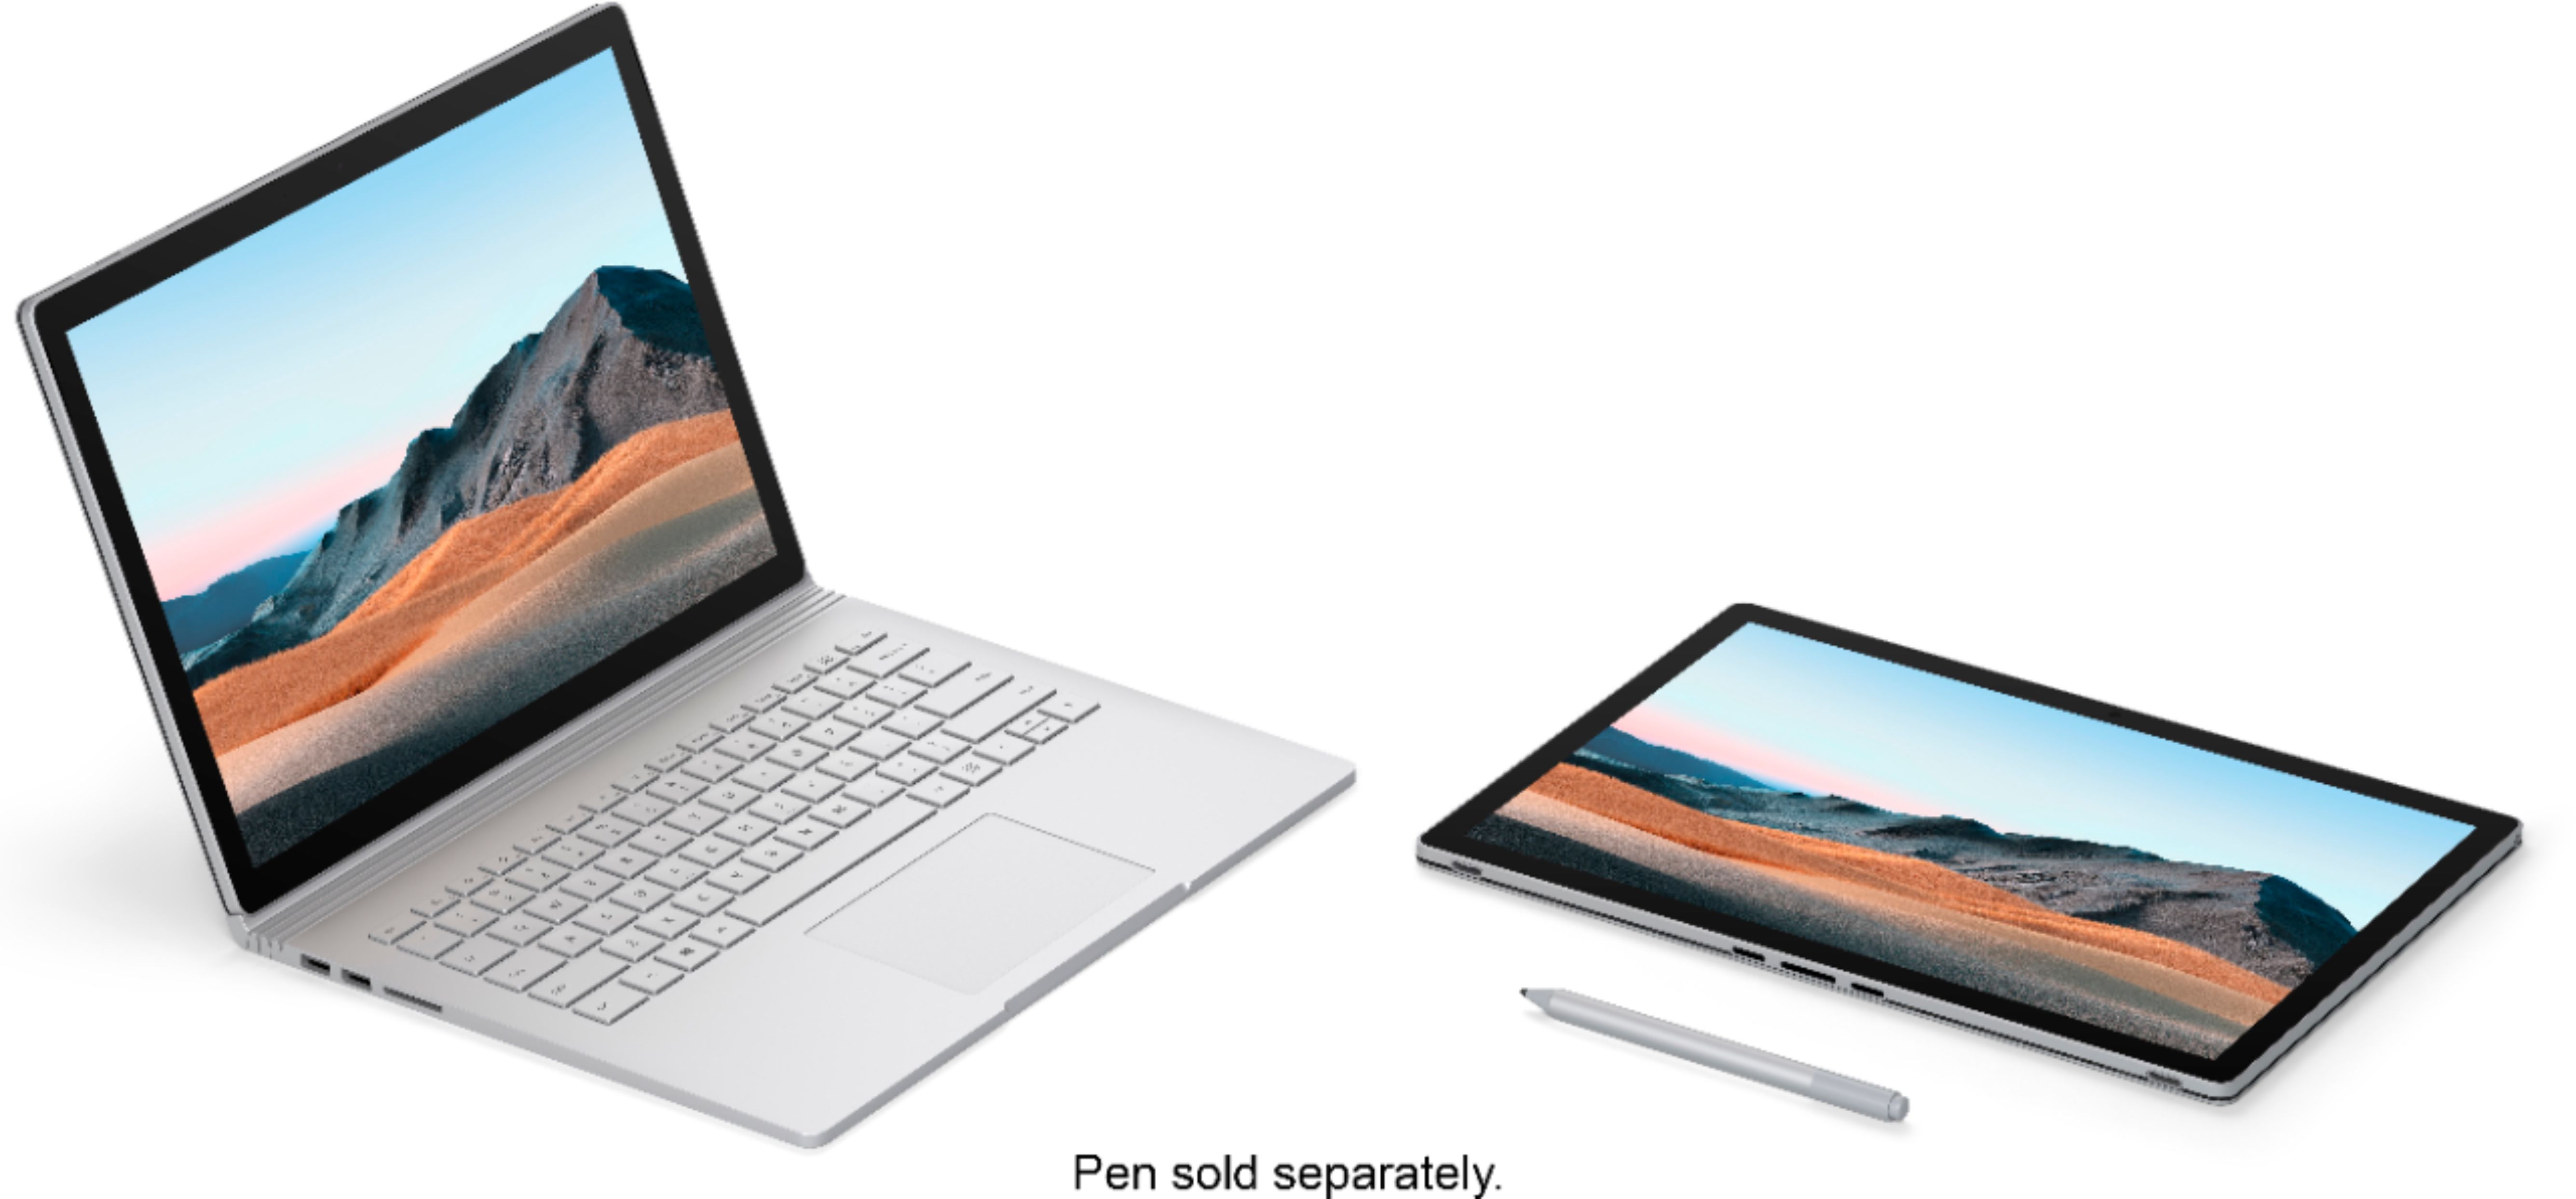 Microsoft Surface Laptop 3 (13.5”) Dimensions & Drawings